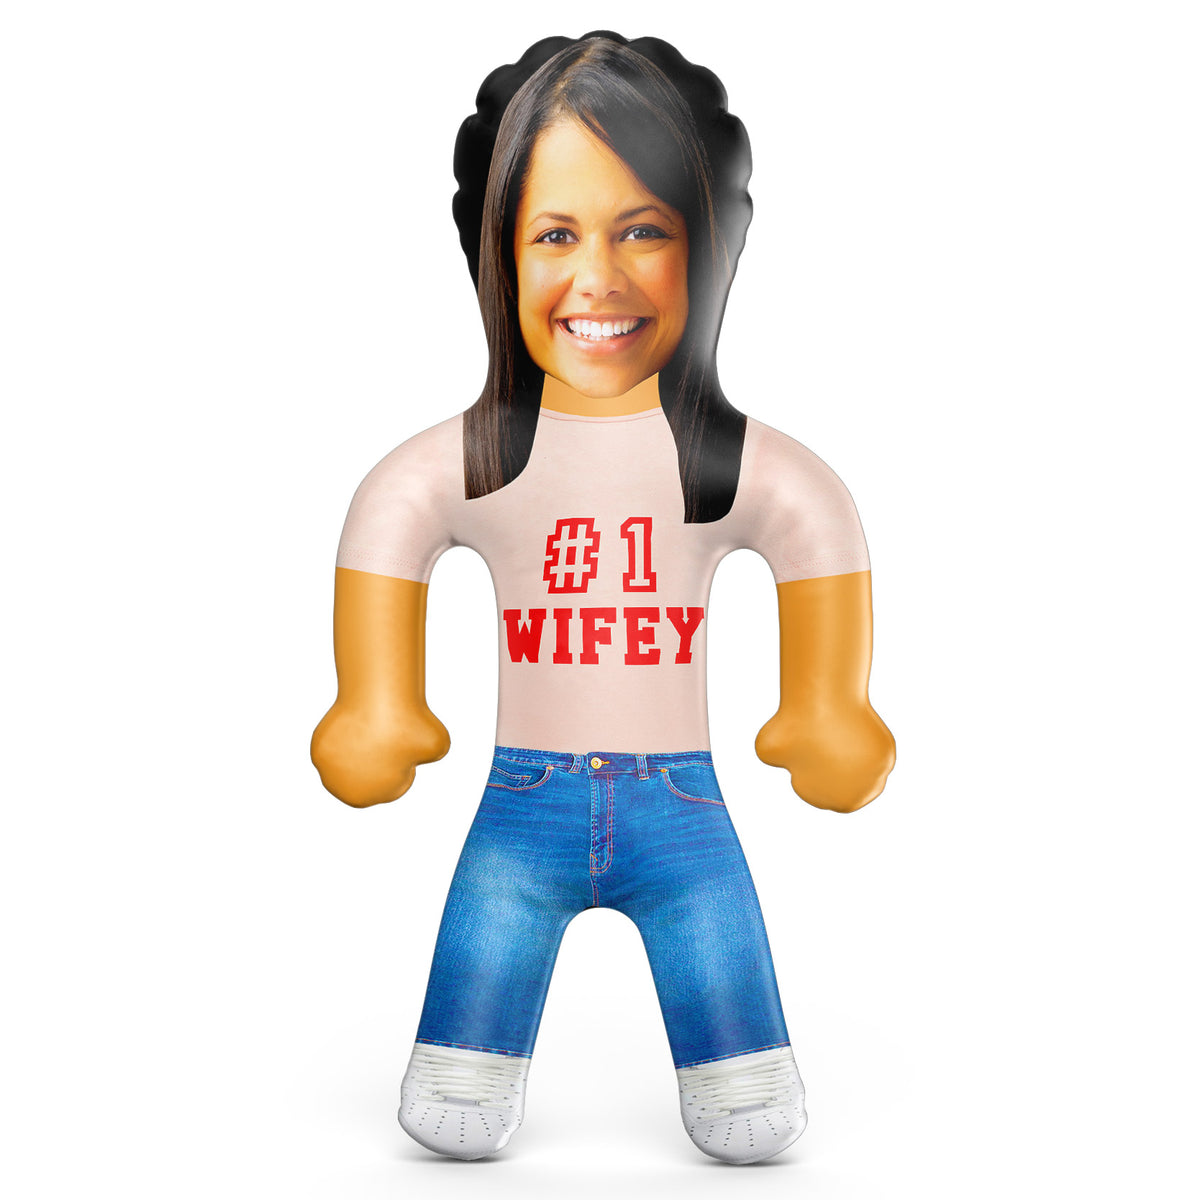 #1 Wifey Inflatable Doll - Wifey Blow Up Doll